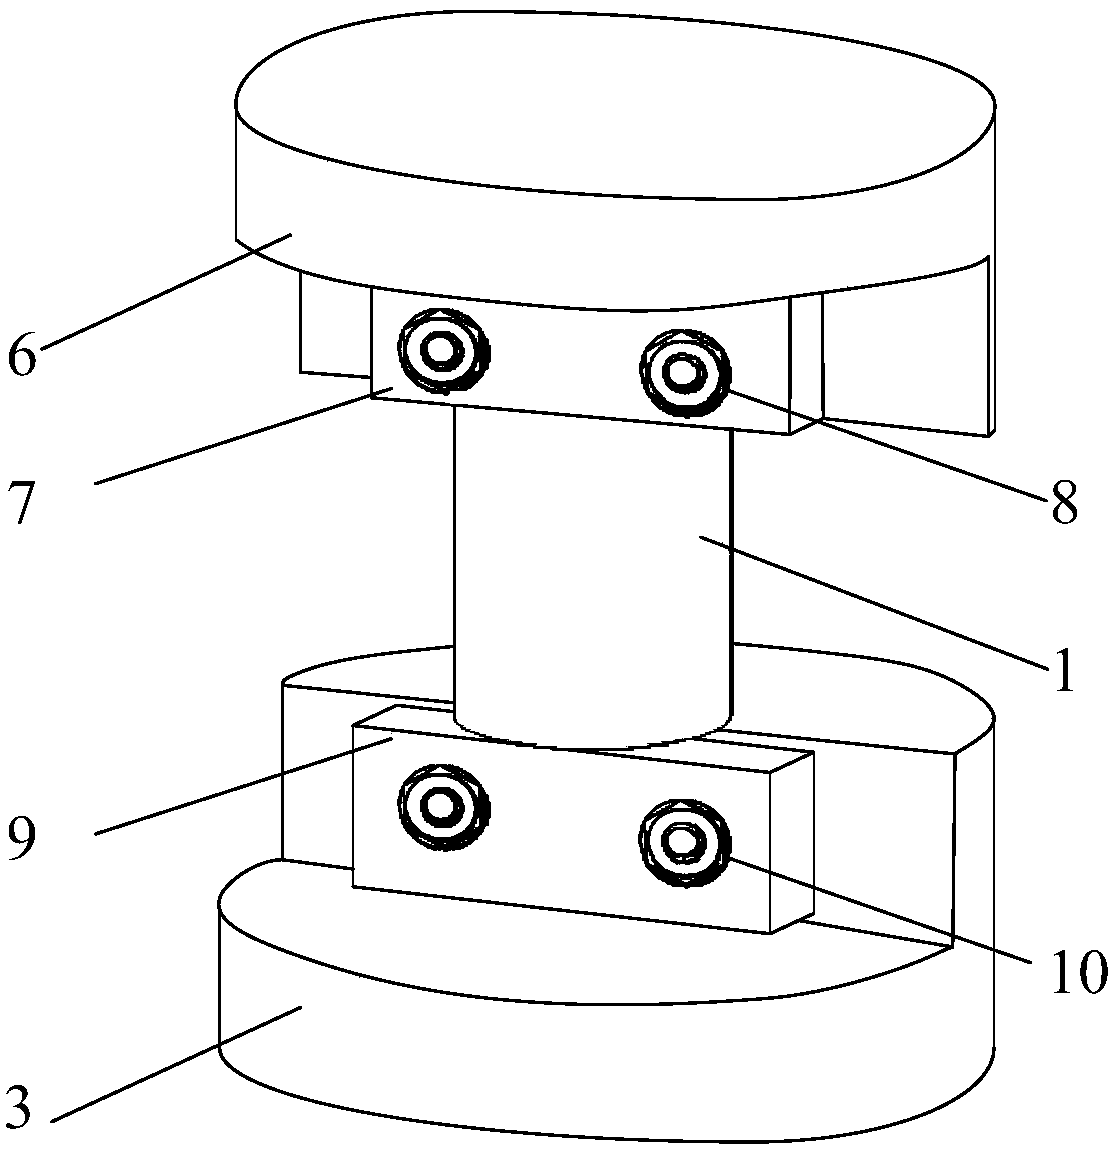 Method for predicting permeability of coal under stress loading conditions based on CT scans